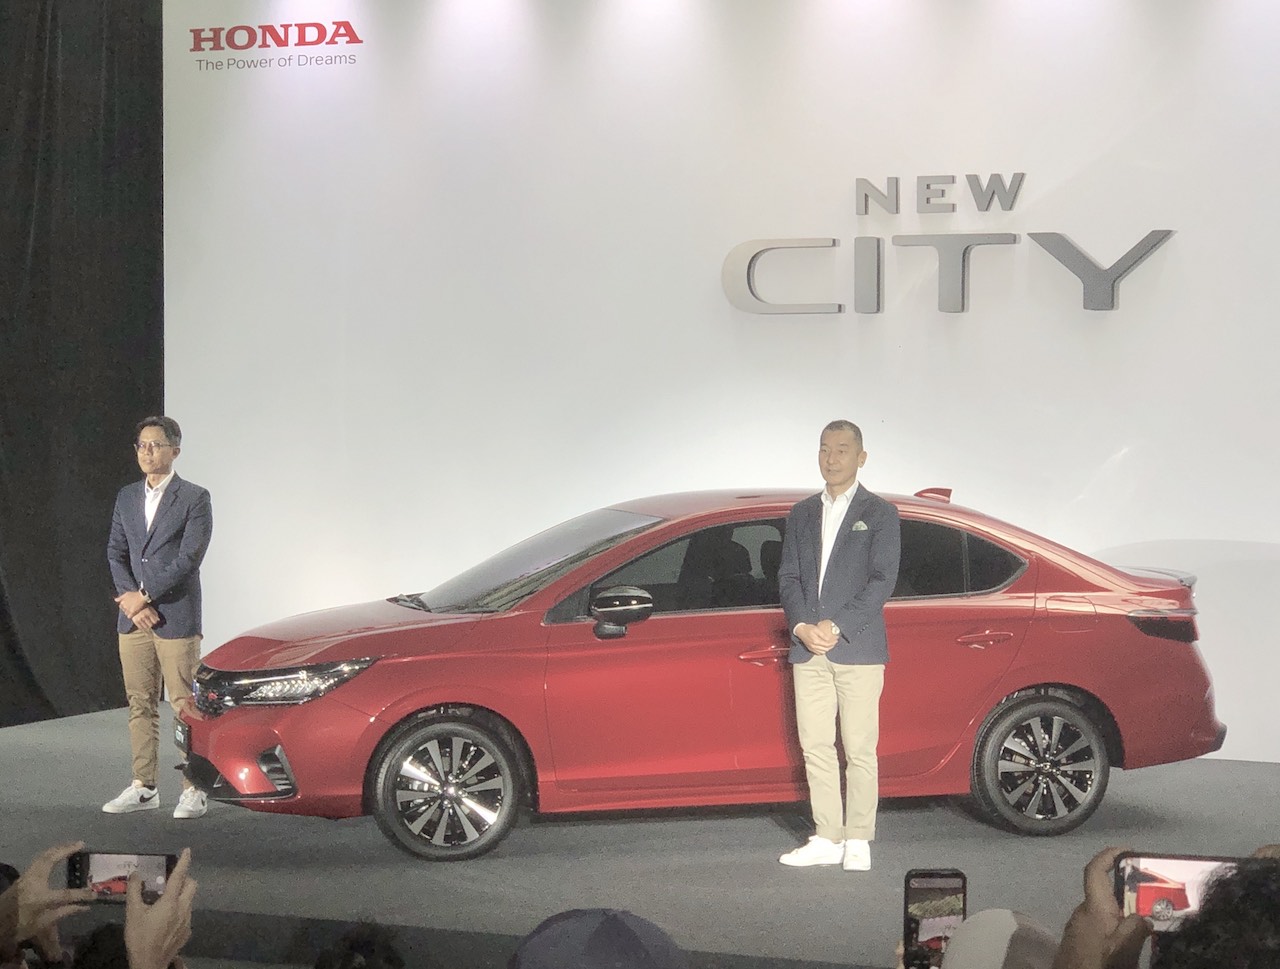 The New City is now offered with two RS variants, Petrol RS and e:HEV RS